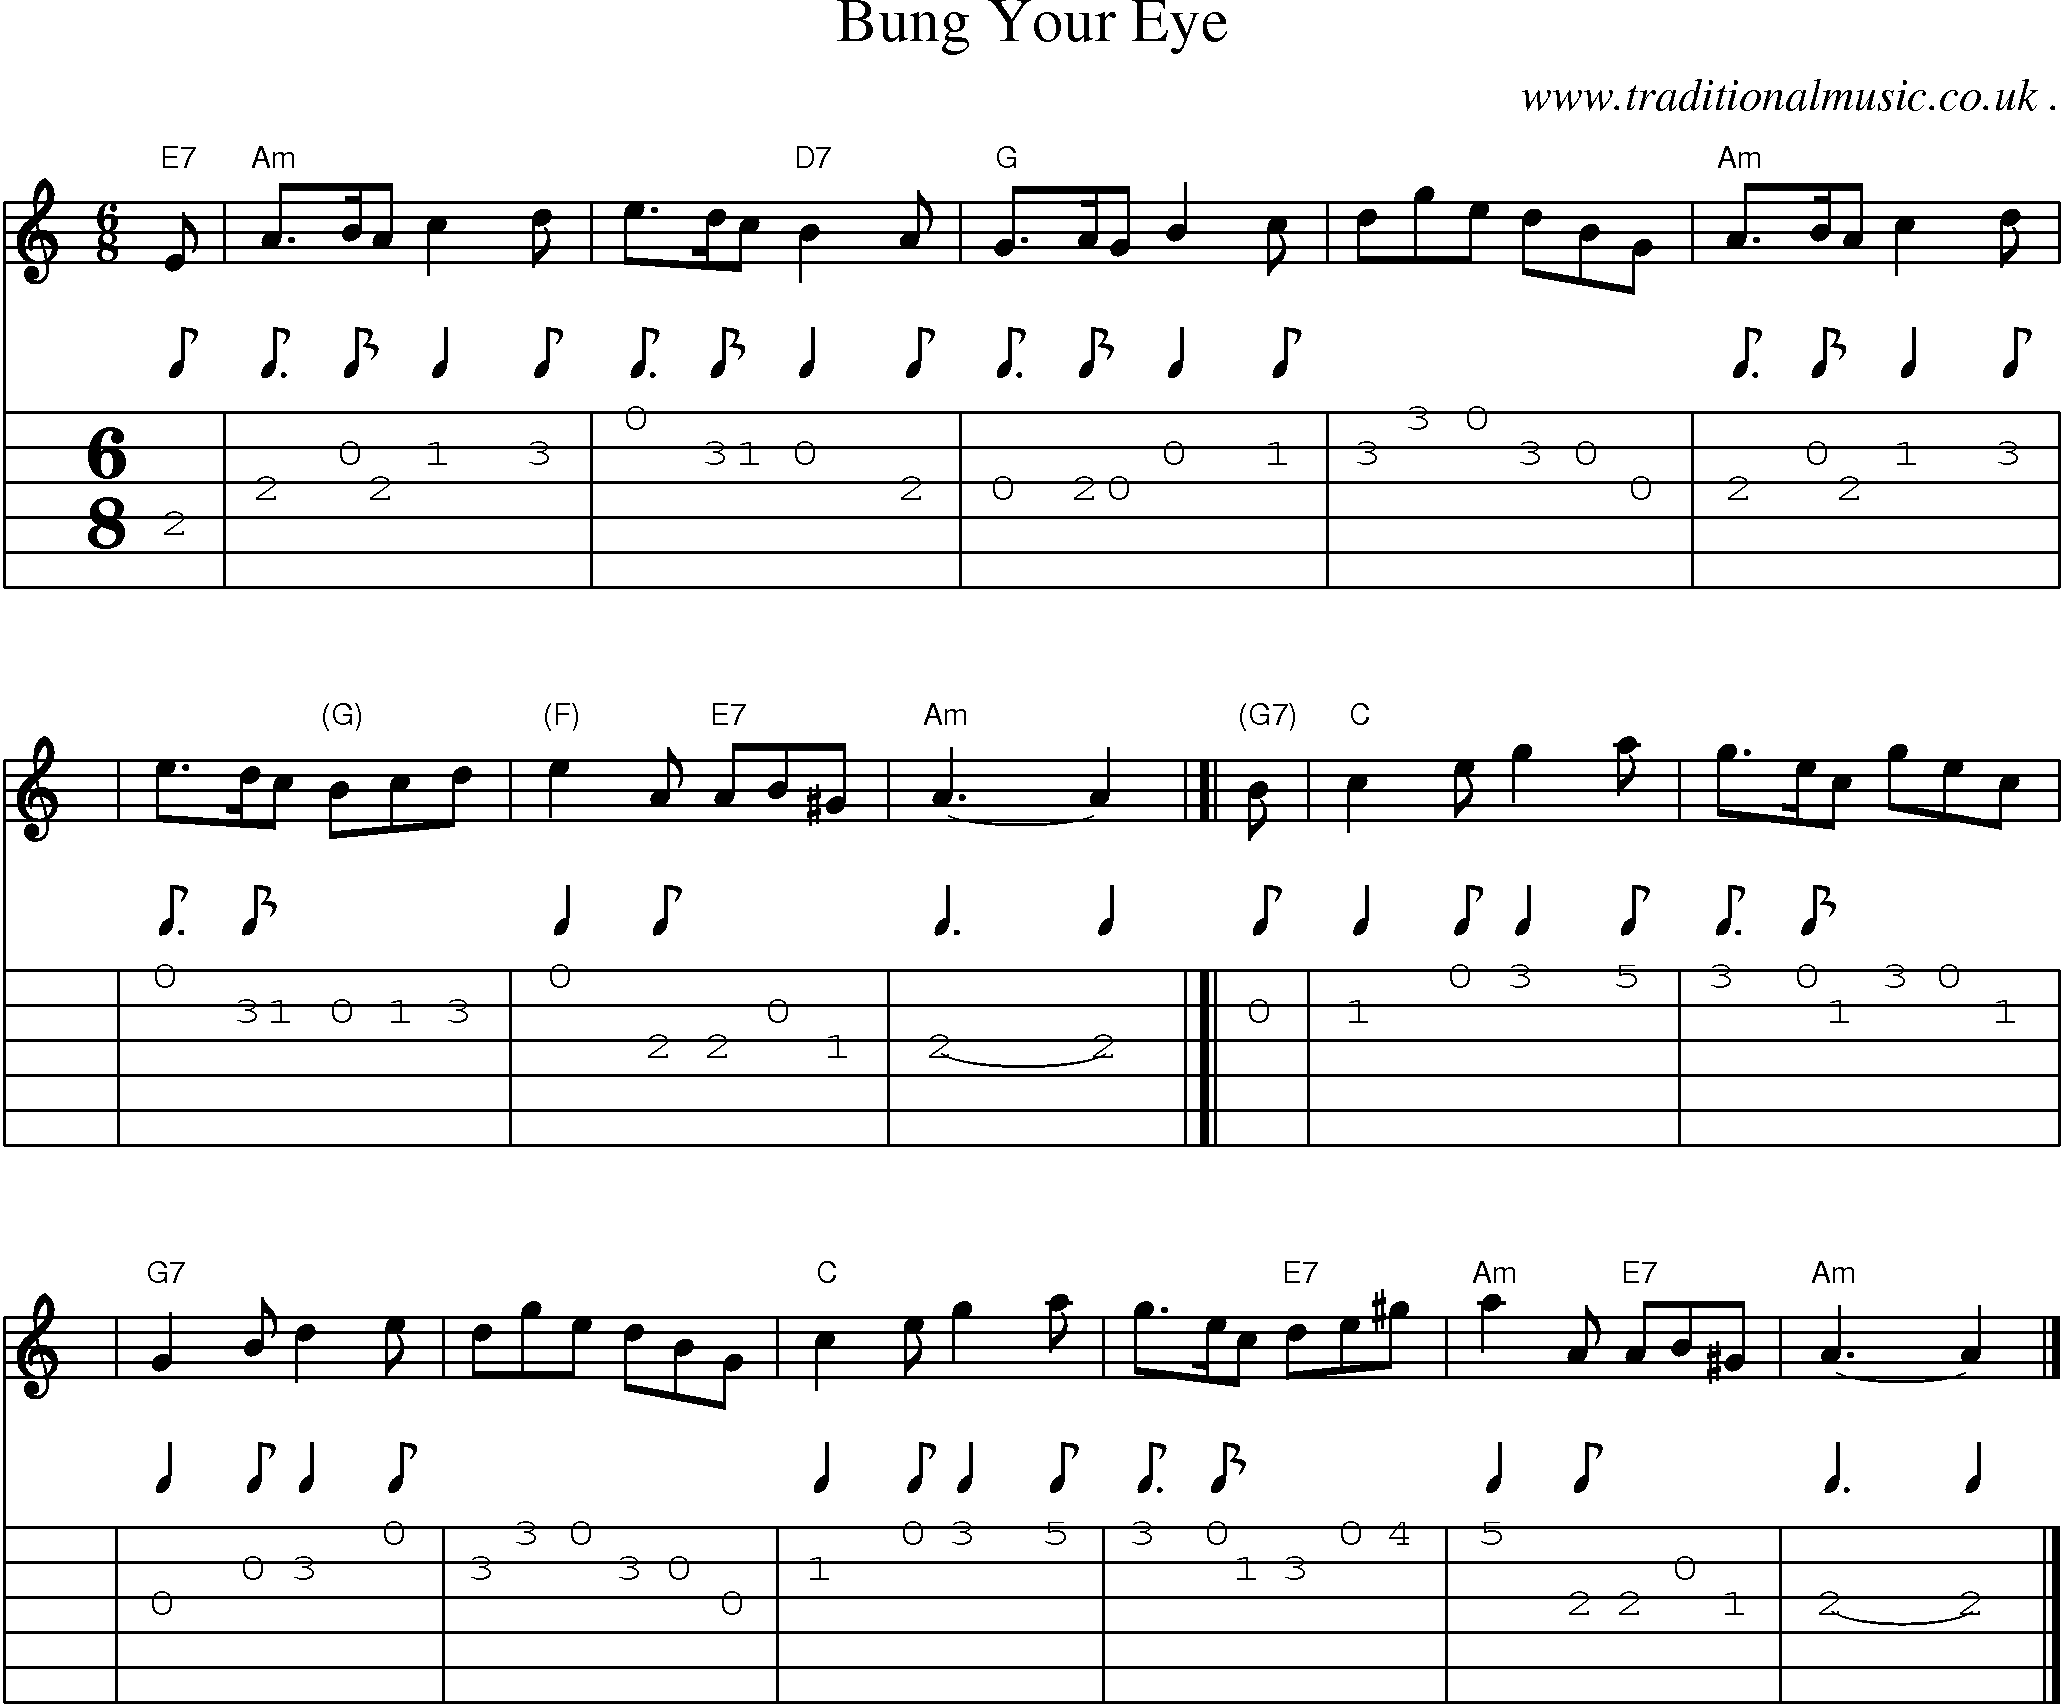 Sheet-music  score, Chords and Guitar Tabs for Bung Your Eye